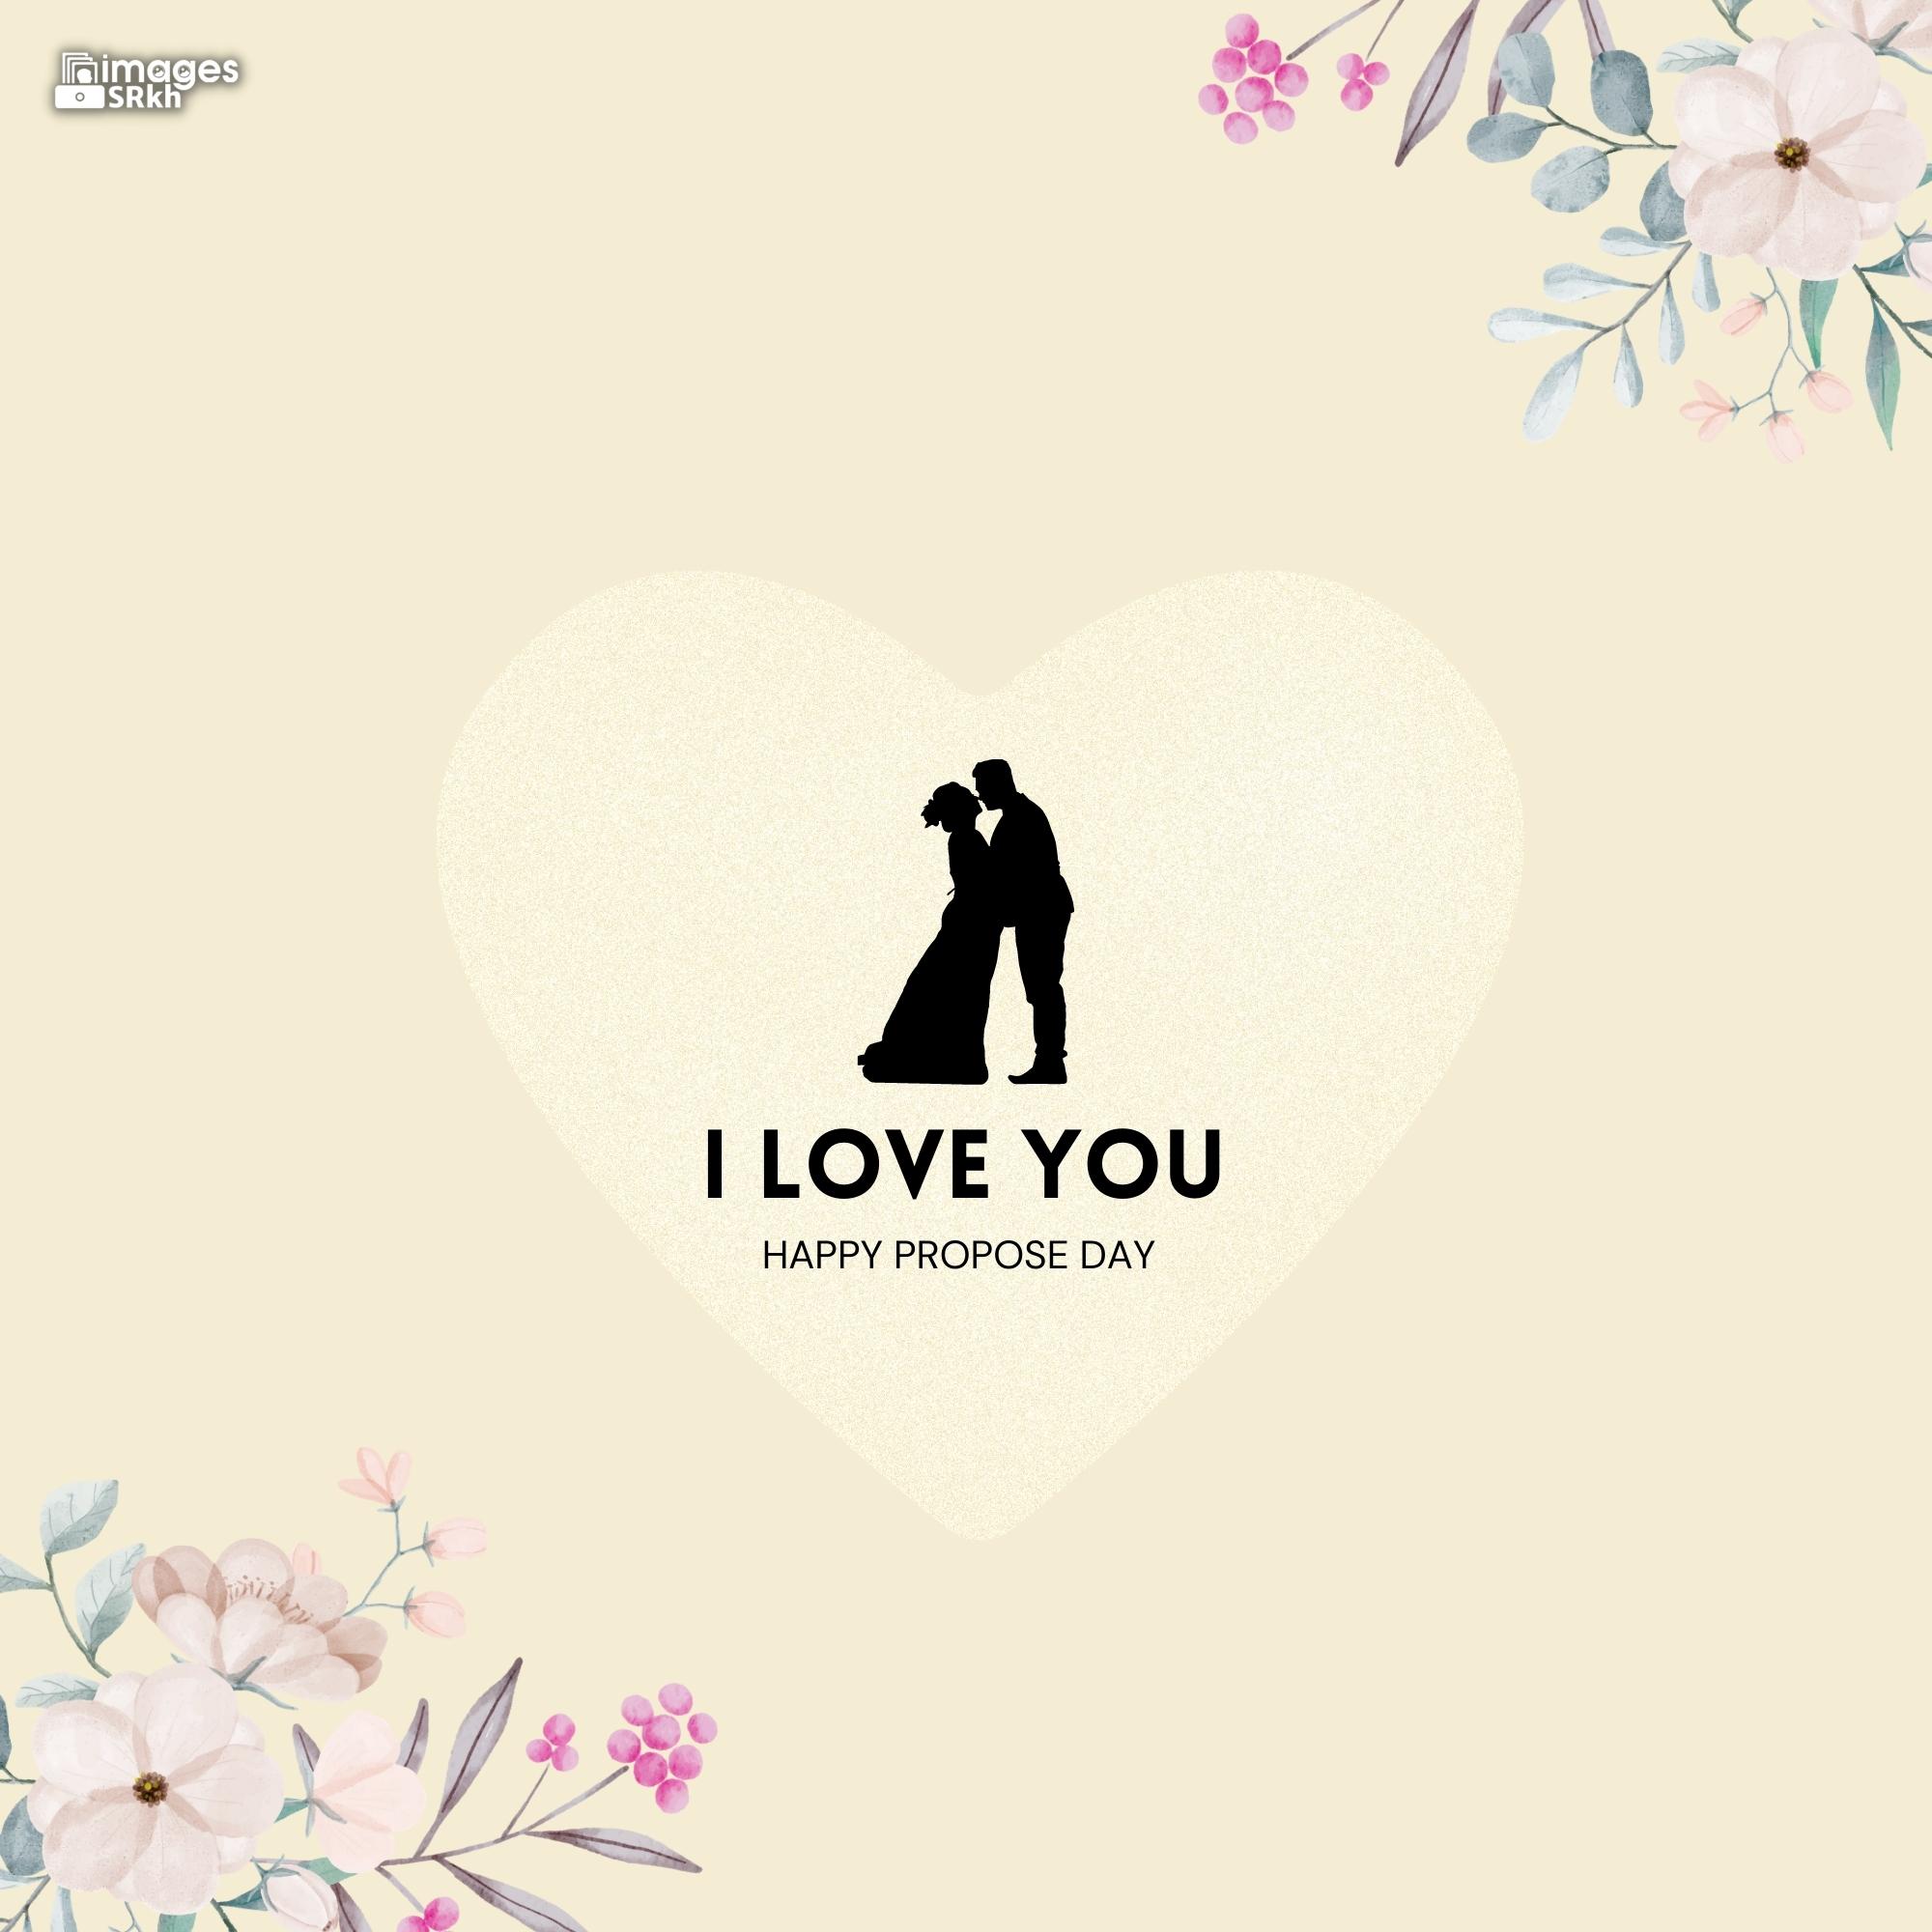 Happy Propose Day Images | 381 | I LOVE YOU